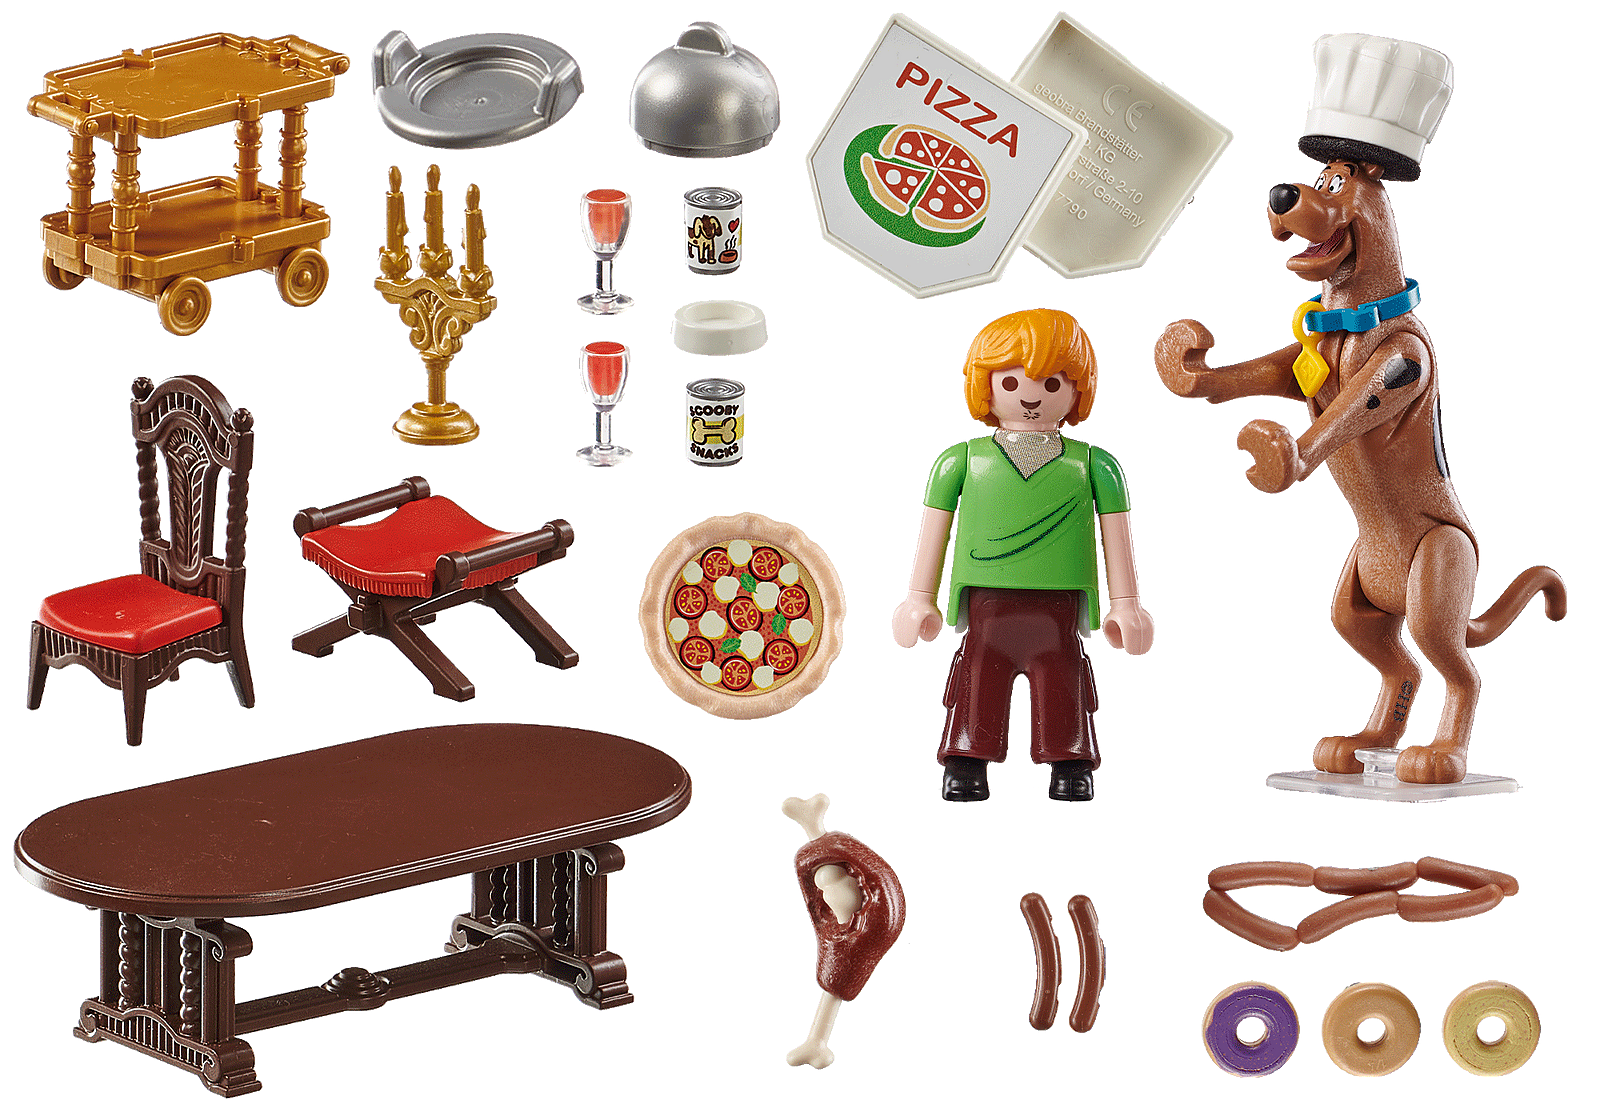 Playmobil 70363 Scooby Doo Dinner with Shaggy Turner Toys